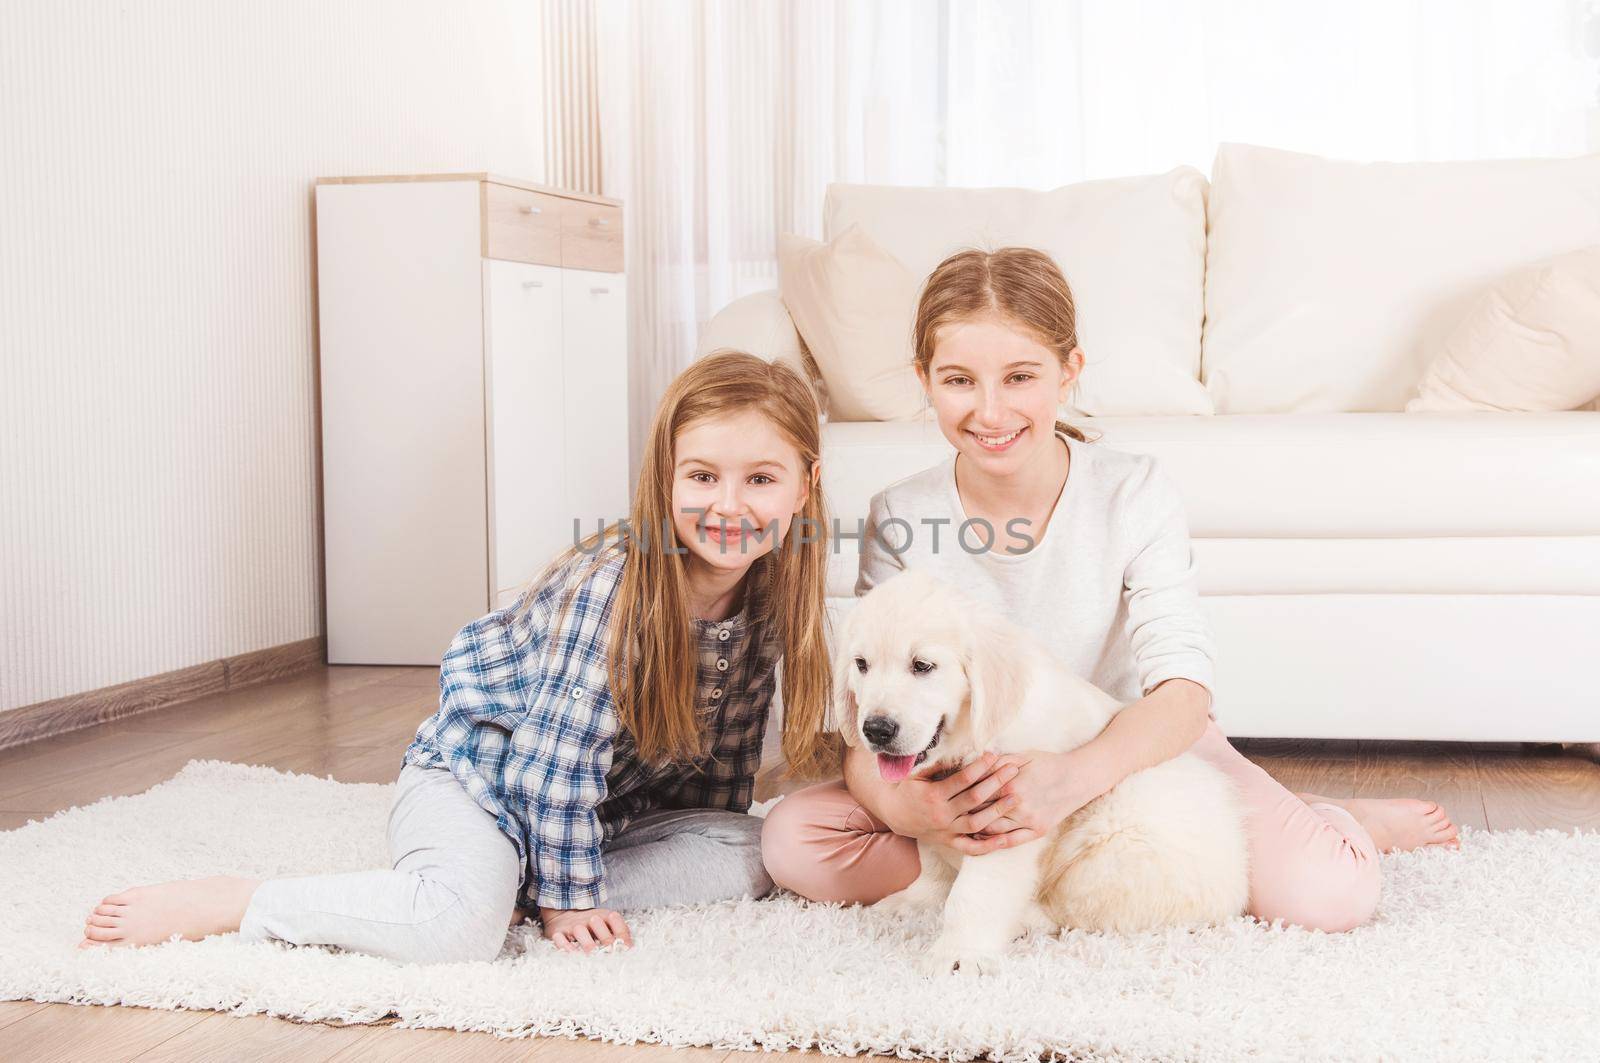 Smiling sisters sit together with retriever puppy by GekaSkr